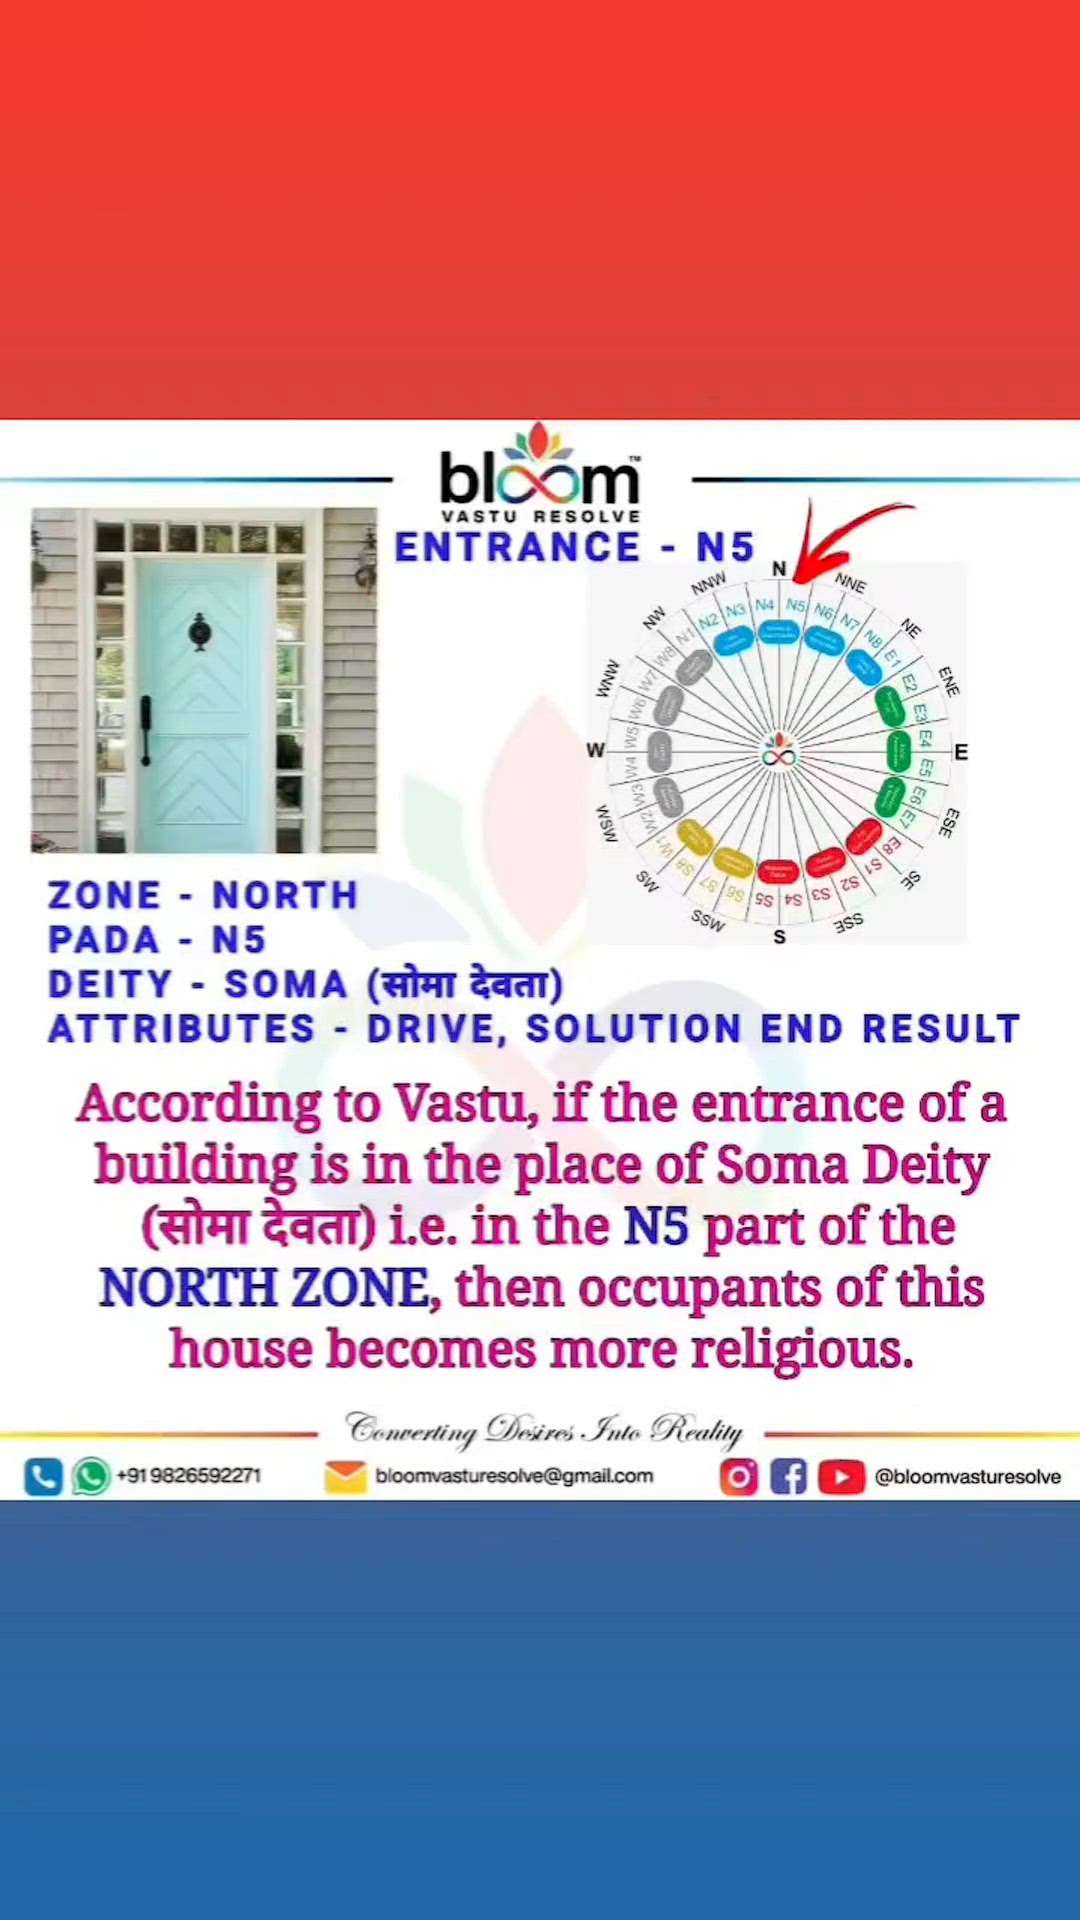 Your queries and comments are always welcome.
For more Vastu please follow @bloomvasturesolve
on YouTube, Instagram & Facebook
.
.
For personal consultation, feel free to contact certified MahaVastu Expert through
M - 9826592271
Or
bloomvasturesolve@gmail.com
#vastu #वास्तु #mahavastu #mahavastuexpert #bloomvasturesolve  #vastureels #vastulogy #vastuexpert  #vasturemedies  #vastuforhome #vastuforpeace #vastudosh #numerology #vastuforentrance #northzone  #उत्तरदिशा #entrance  #doors